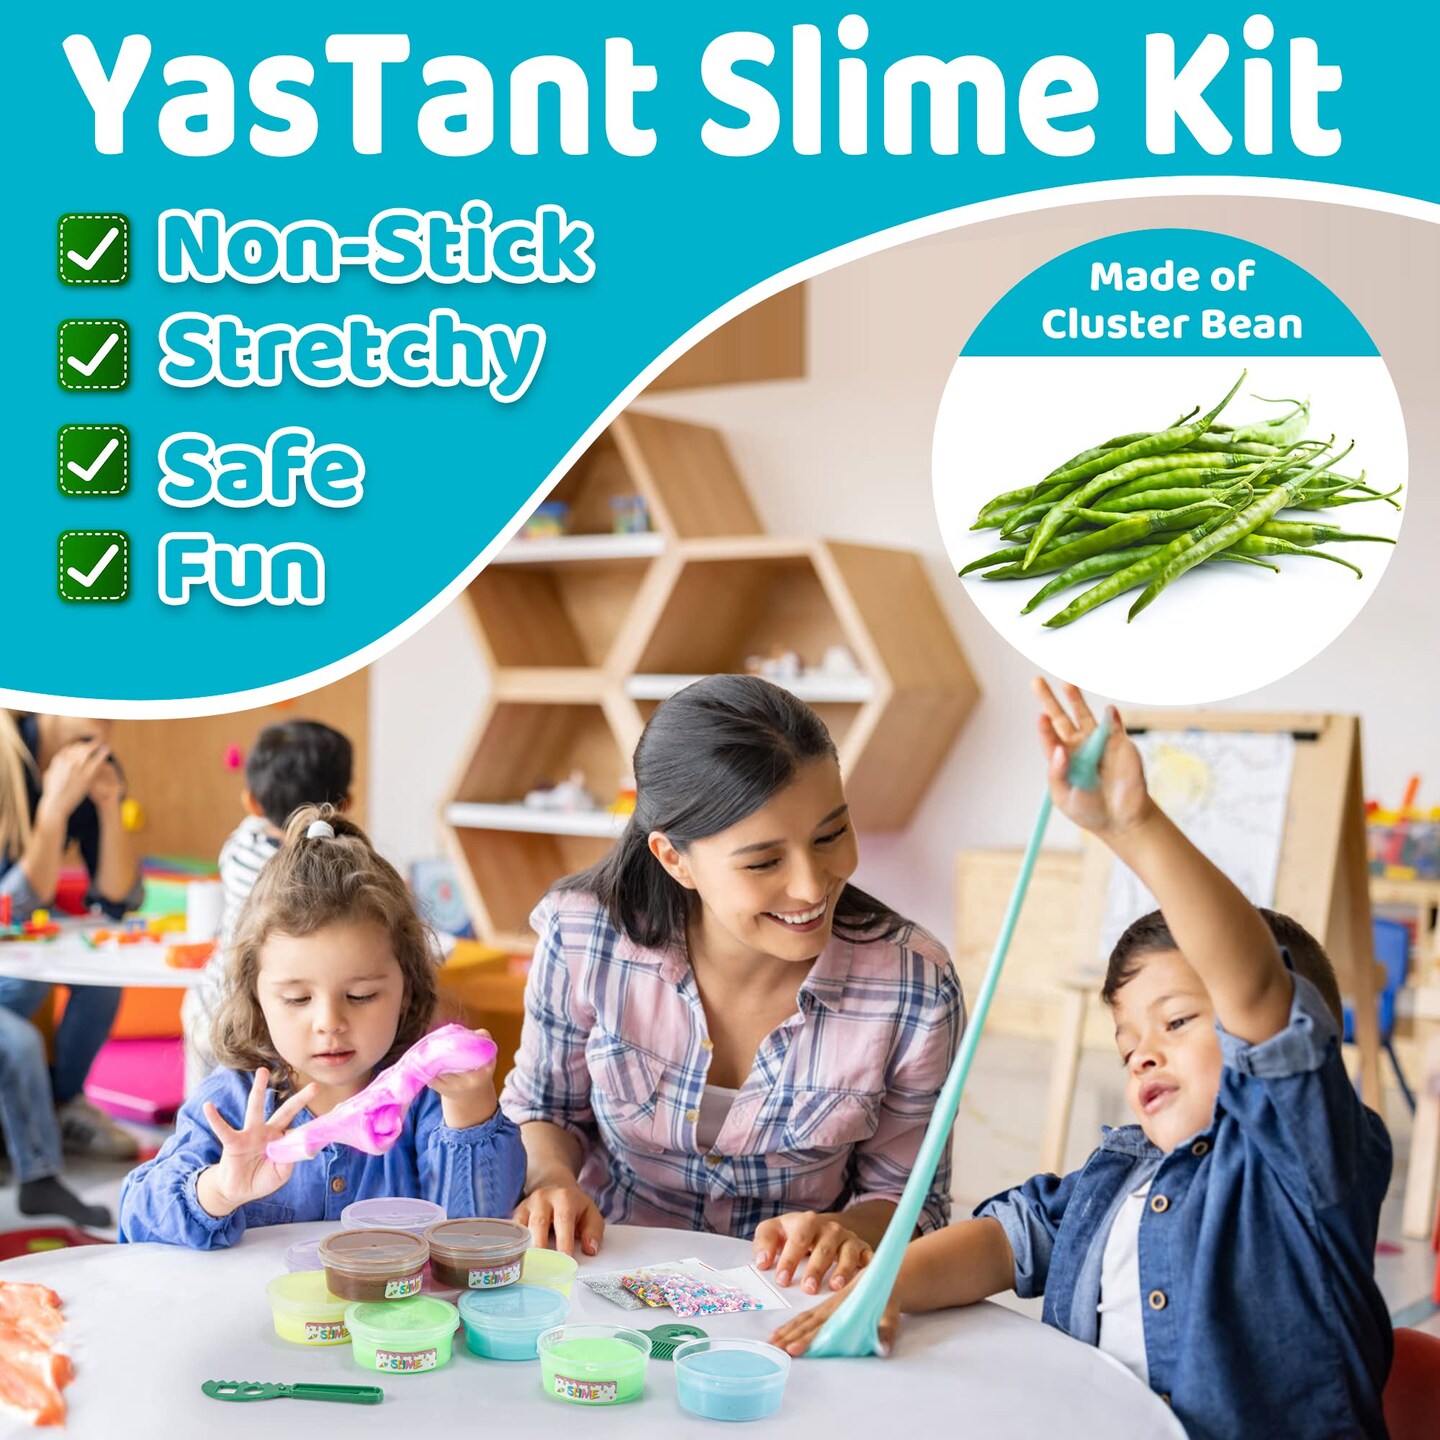 YasTant Slime Kit for Girls and Boys, Safe and Fluffy Slime for Kids, Stress Relief Kids Slime Kits for Toddlers, Stretchy Butter Slime Pack of 6